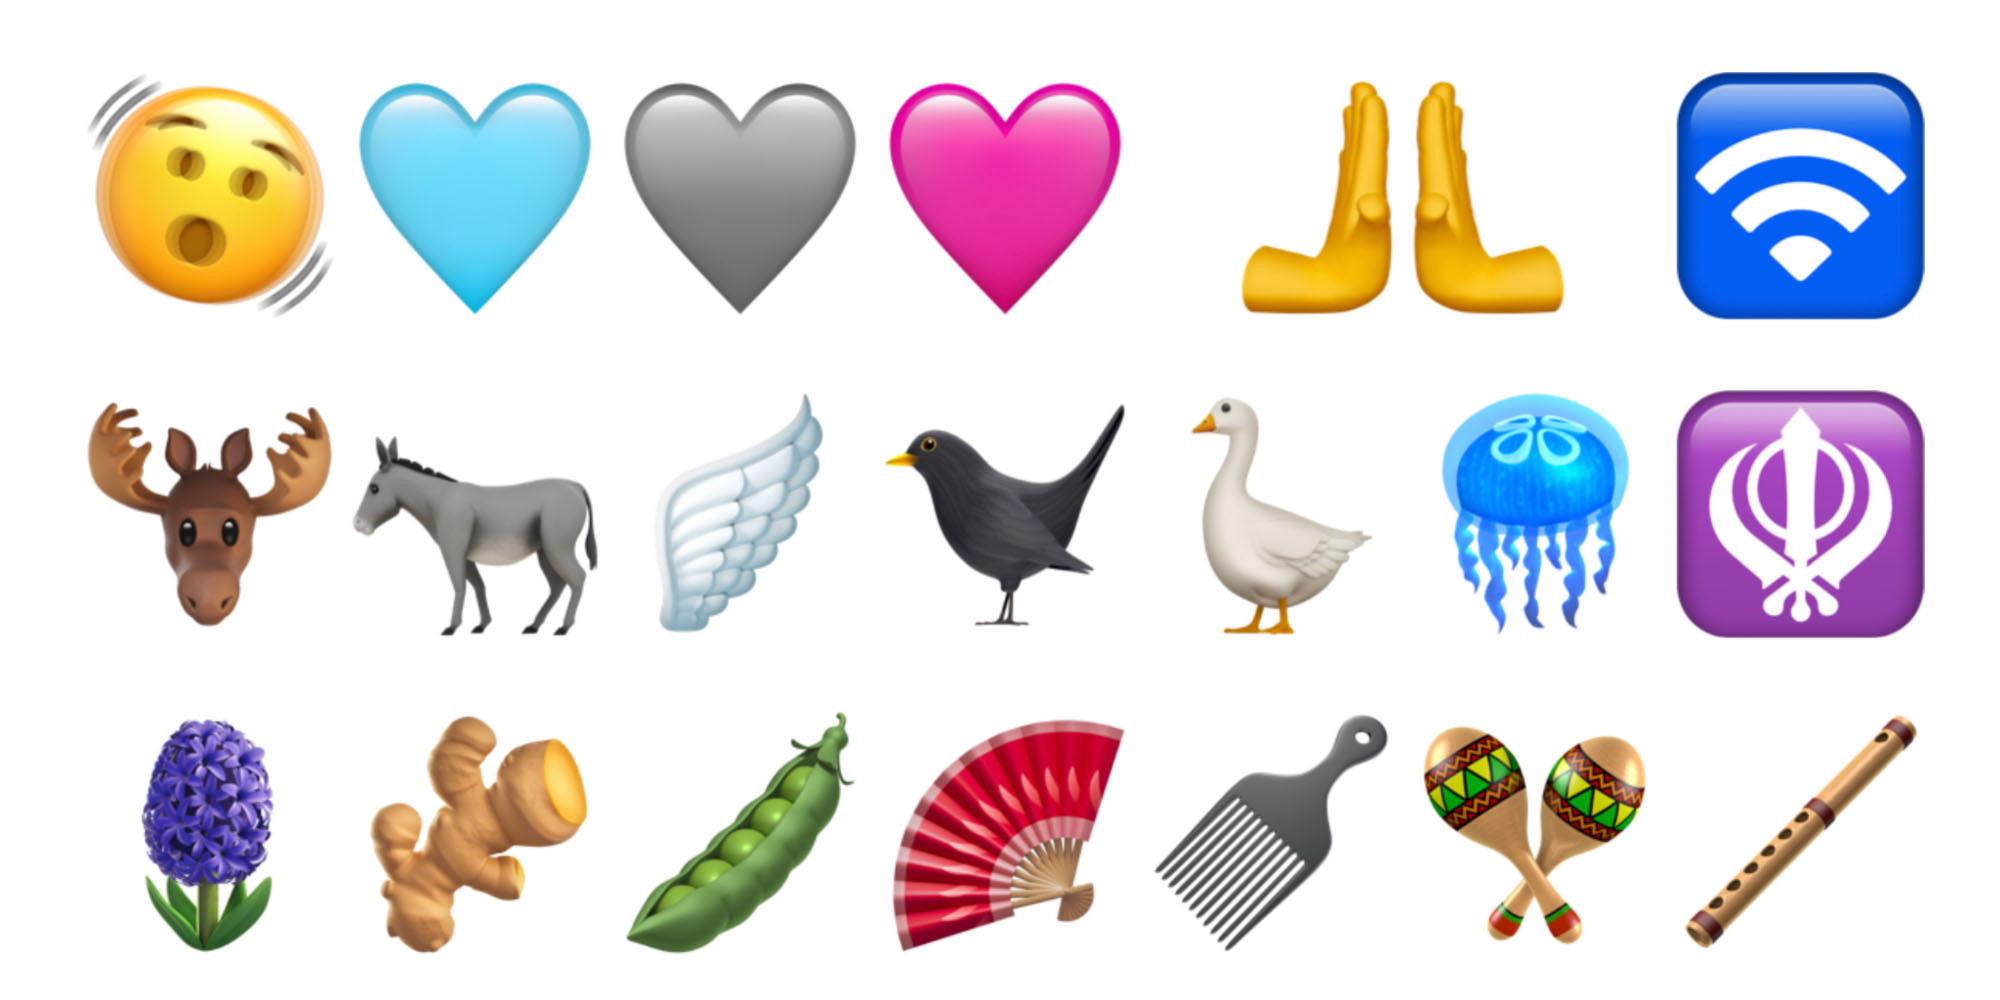 iOS 16.4 and iPadOS 16.4 add new Emoji for iPhone and iPad users